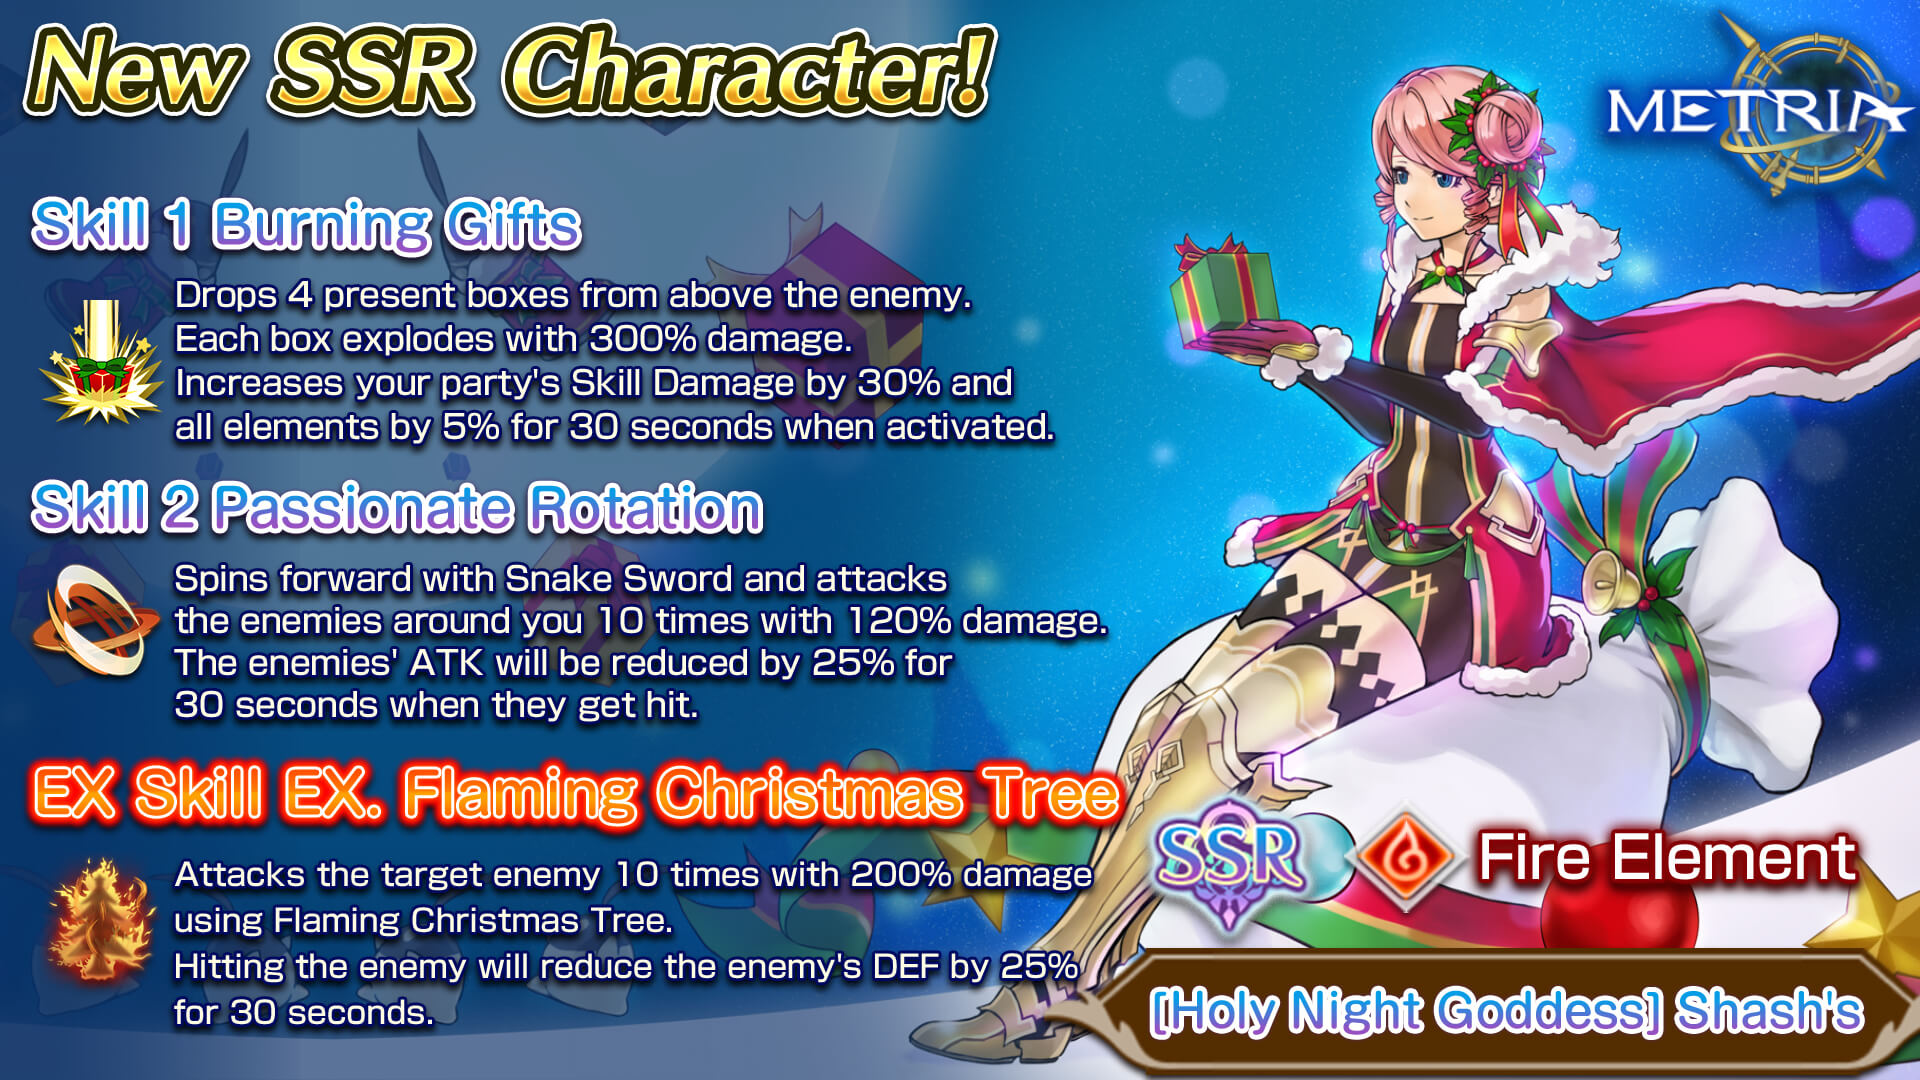 New SSR Character: "Holy Night Goddess Shash's" Available for Purchase!